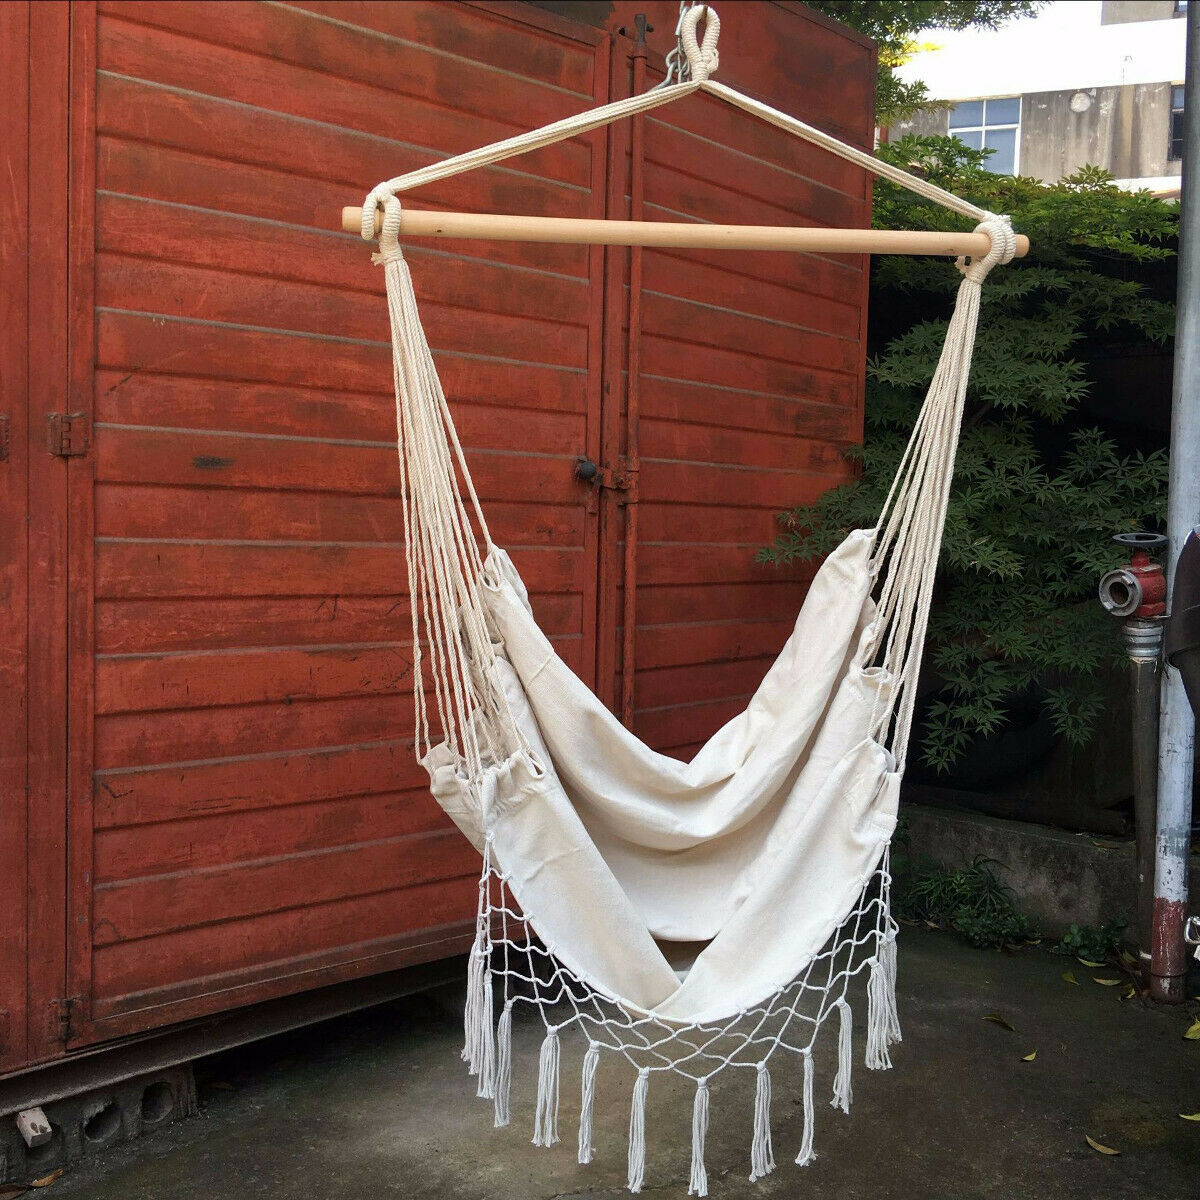 Swing Hanging Chair Portable Hammock  Padded Camping Hanging Seat Indoor  â™ª